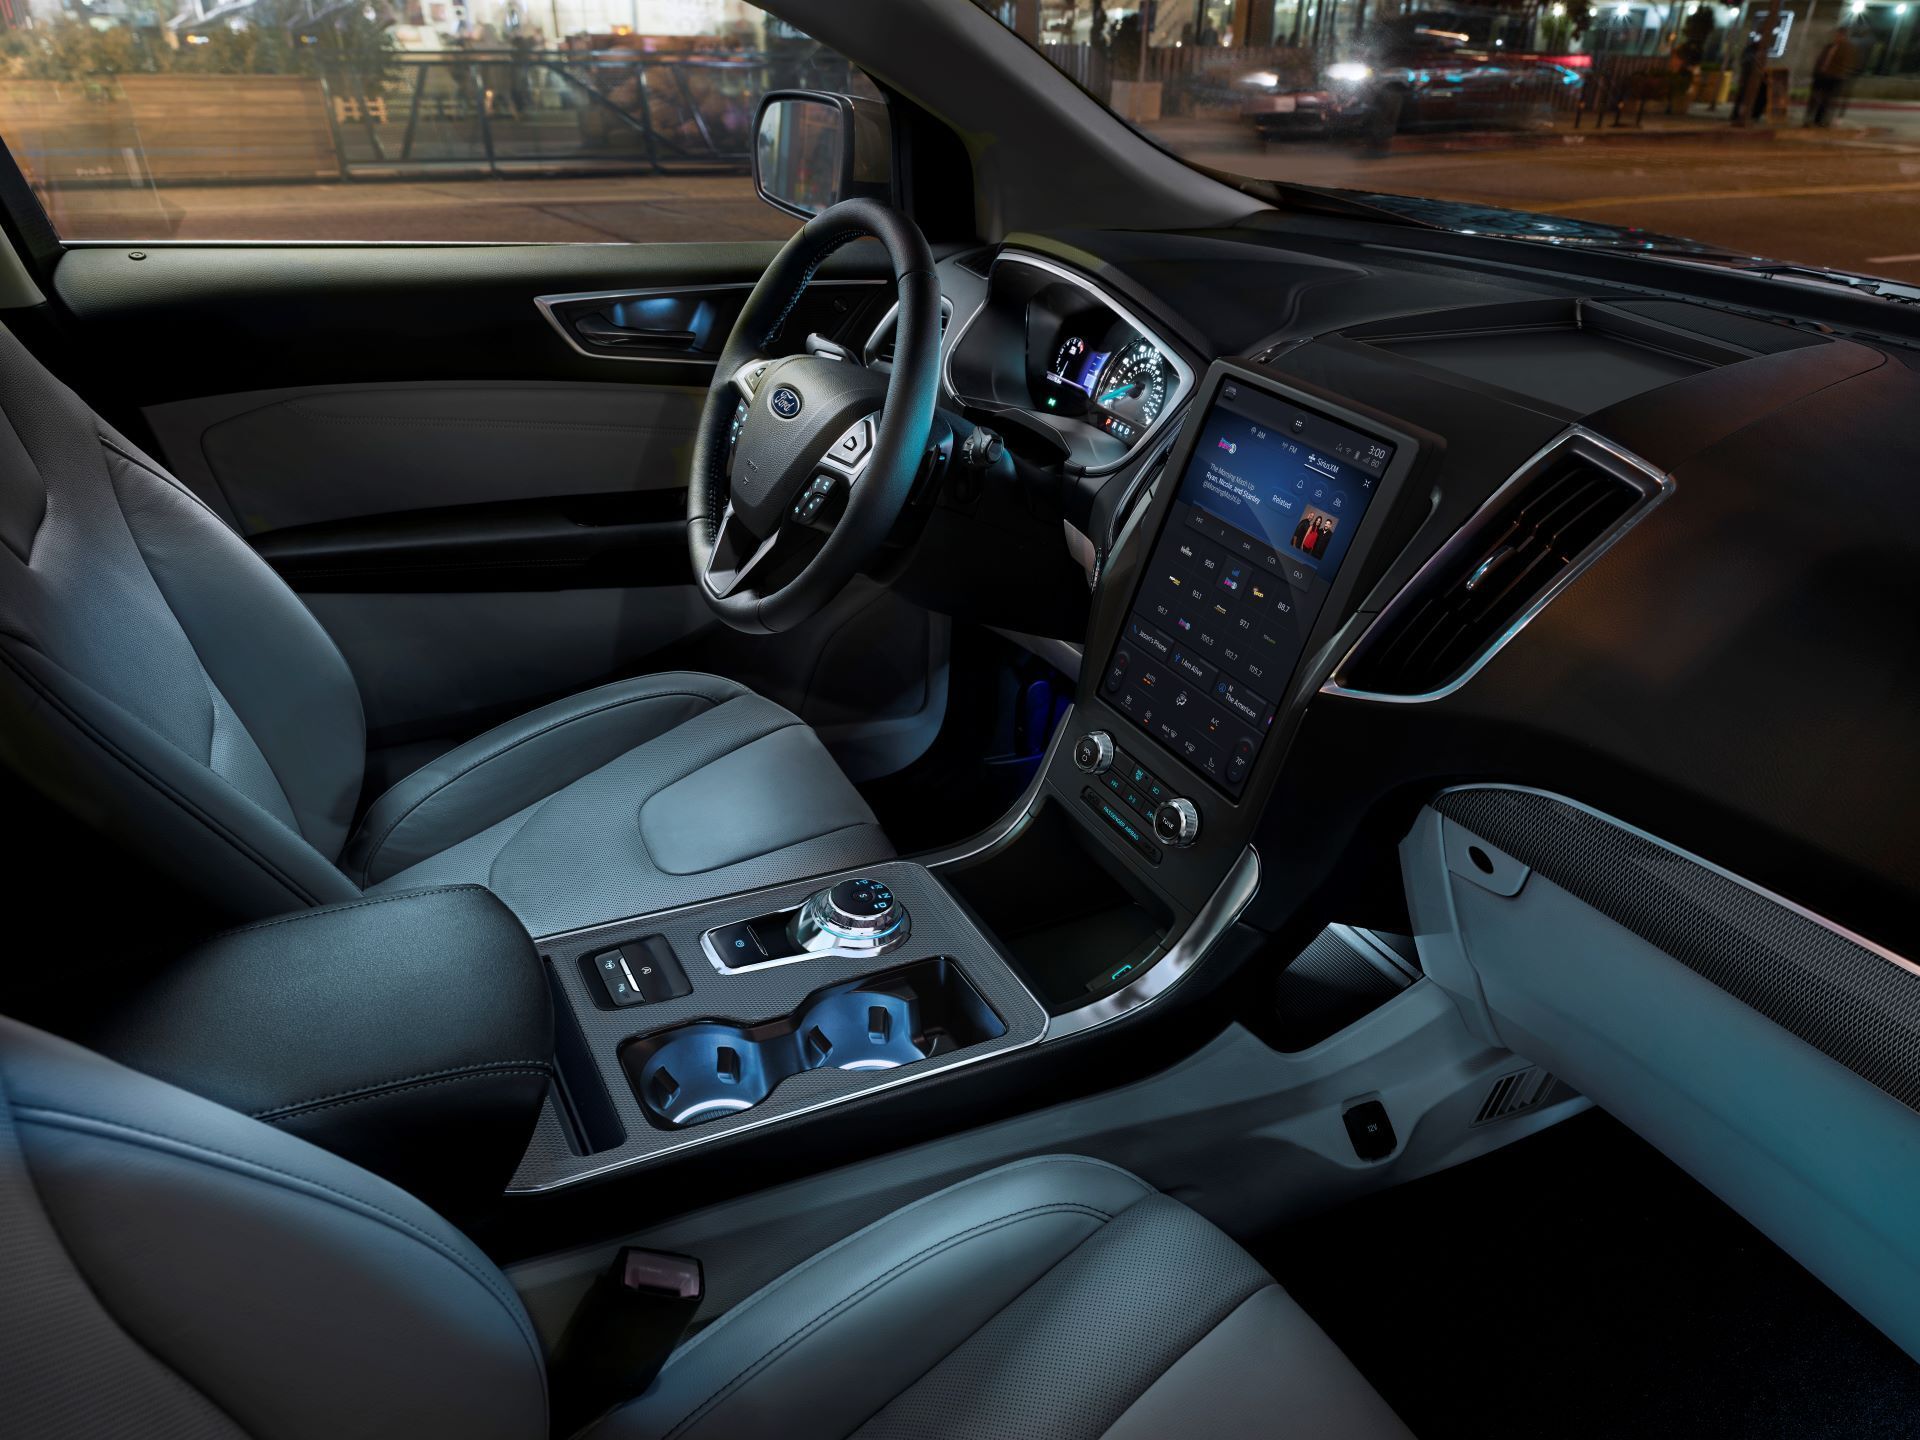 2024 Ford Edge A Comprehensive Guide On Features, Specs, And Pricing